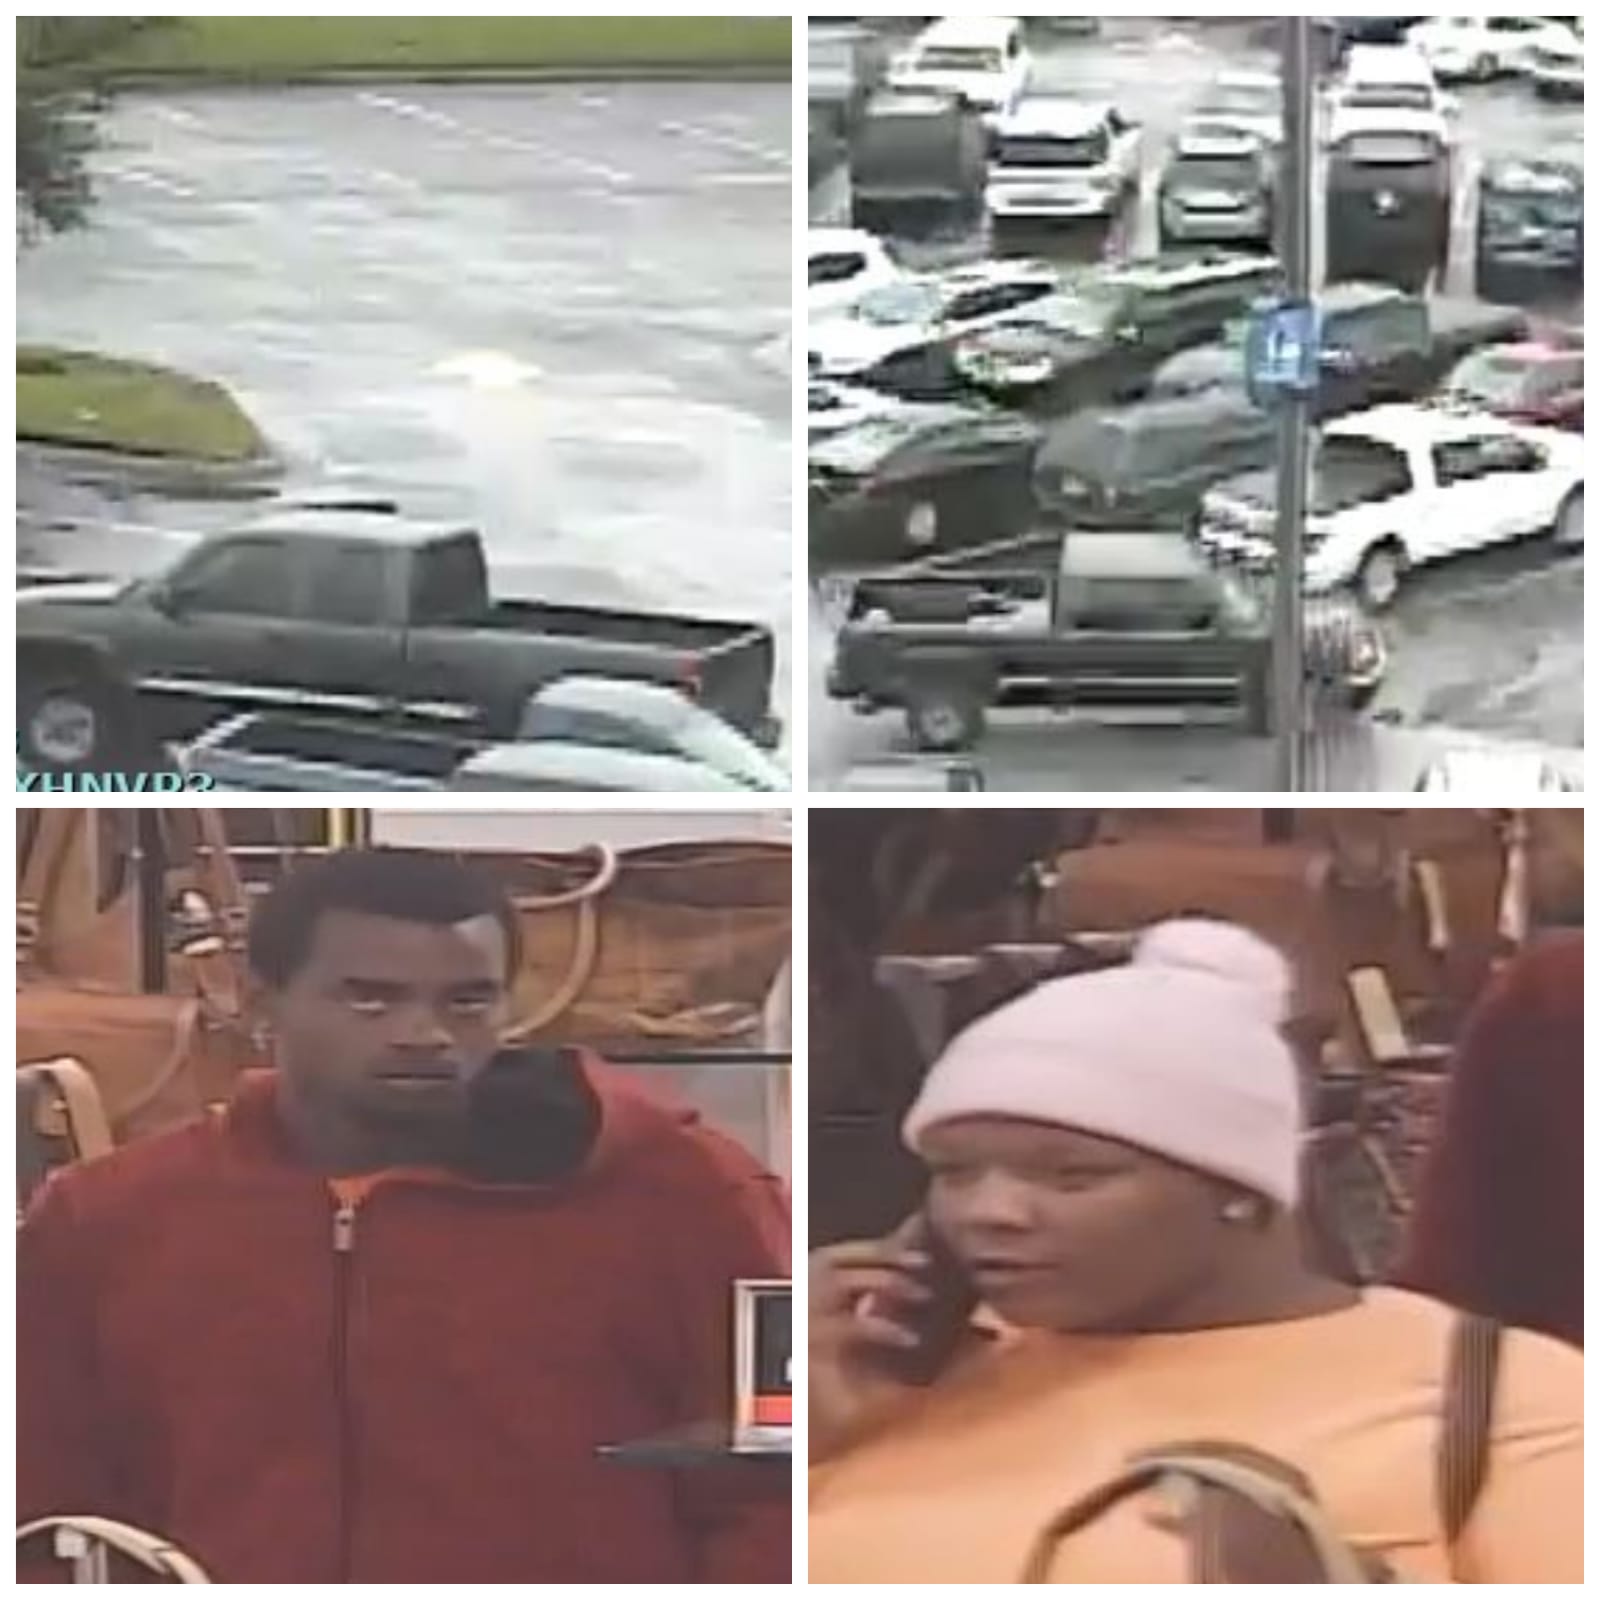 Photo collage of suspect truck in parking lot, one male suspect wearing a dark red hoodie and one female suspect wearing an orange top and a light colored winter hat. 